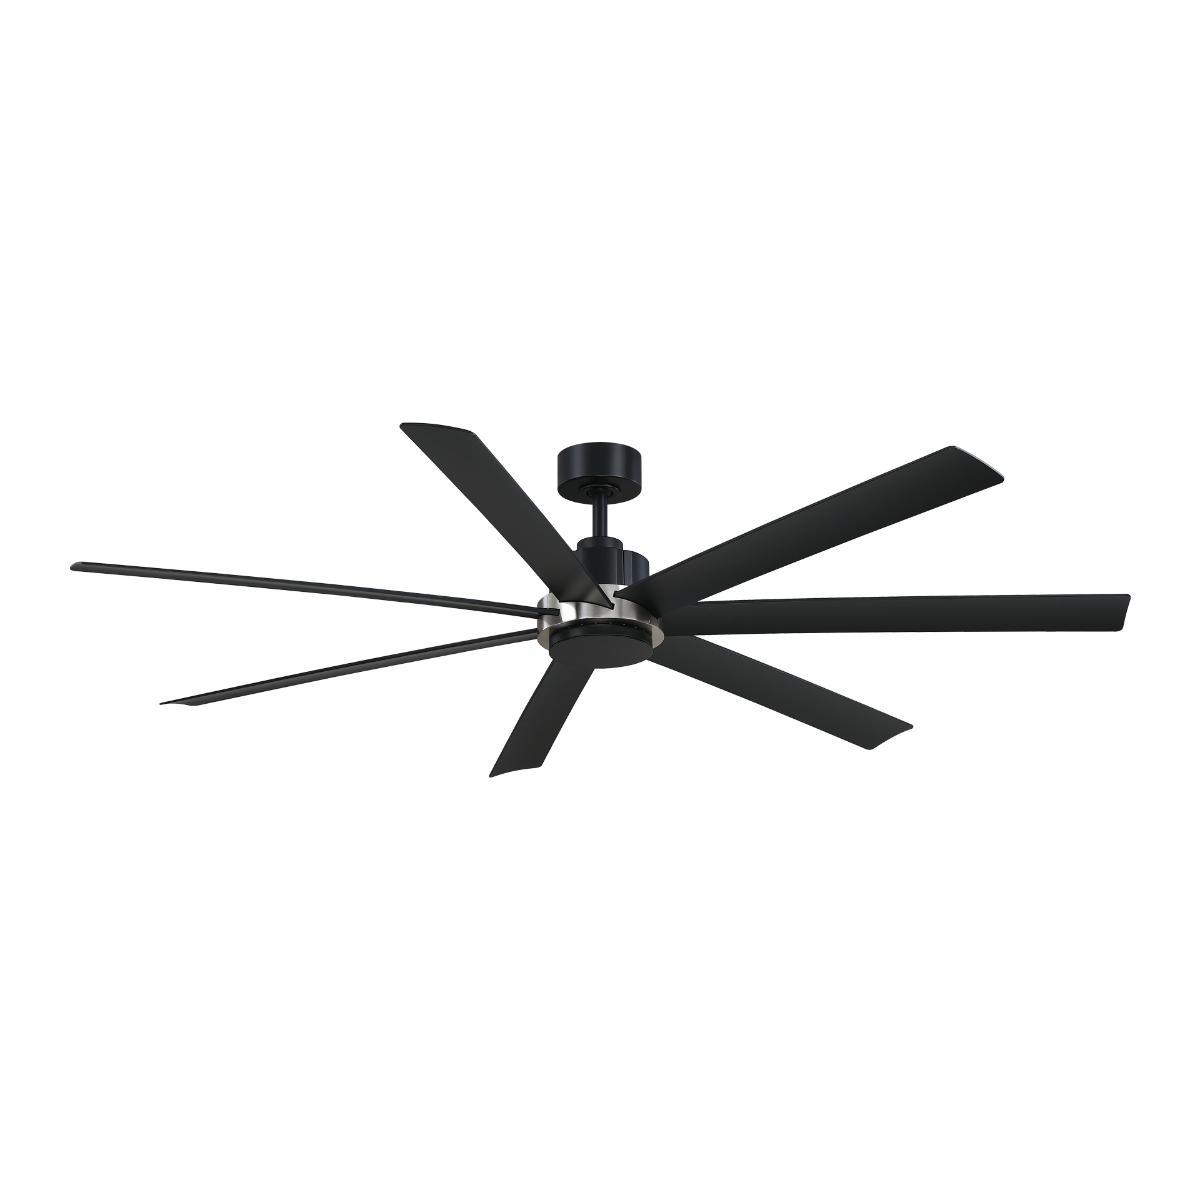 Pendry 72 inch Indoor/Outdoor Ceiling Fan with Remote, Black and Brushed Nickel Finish - Bees Lighting